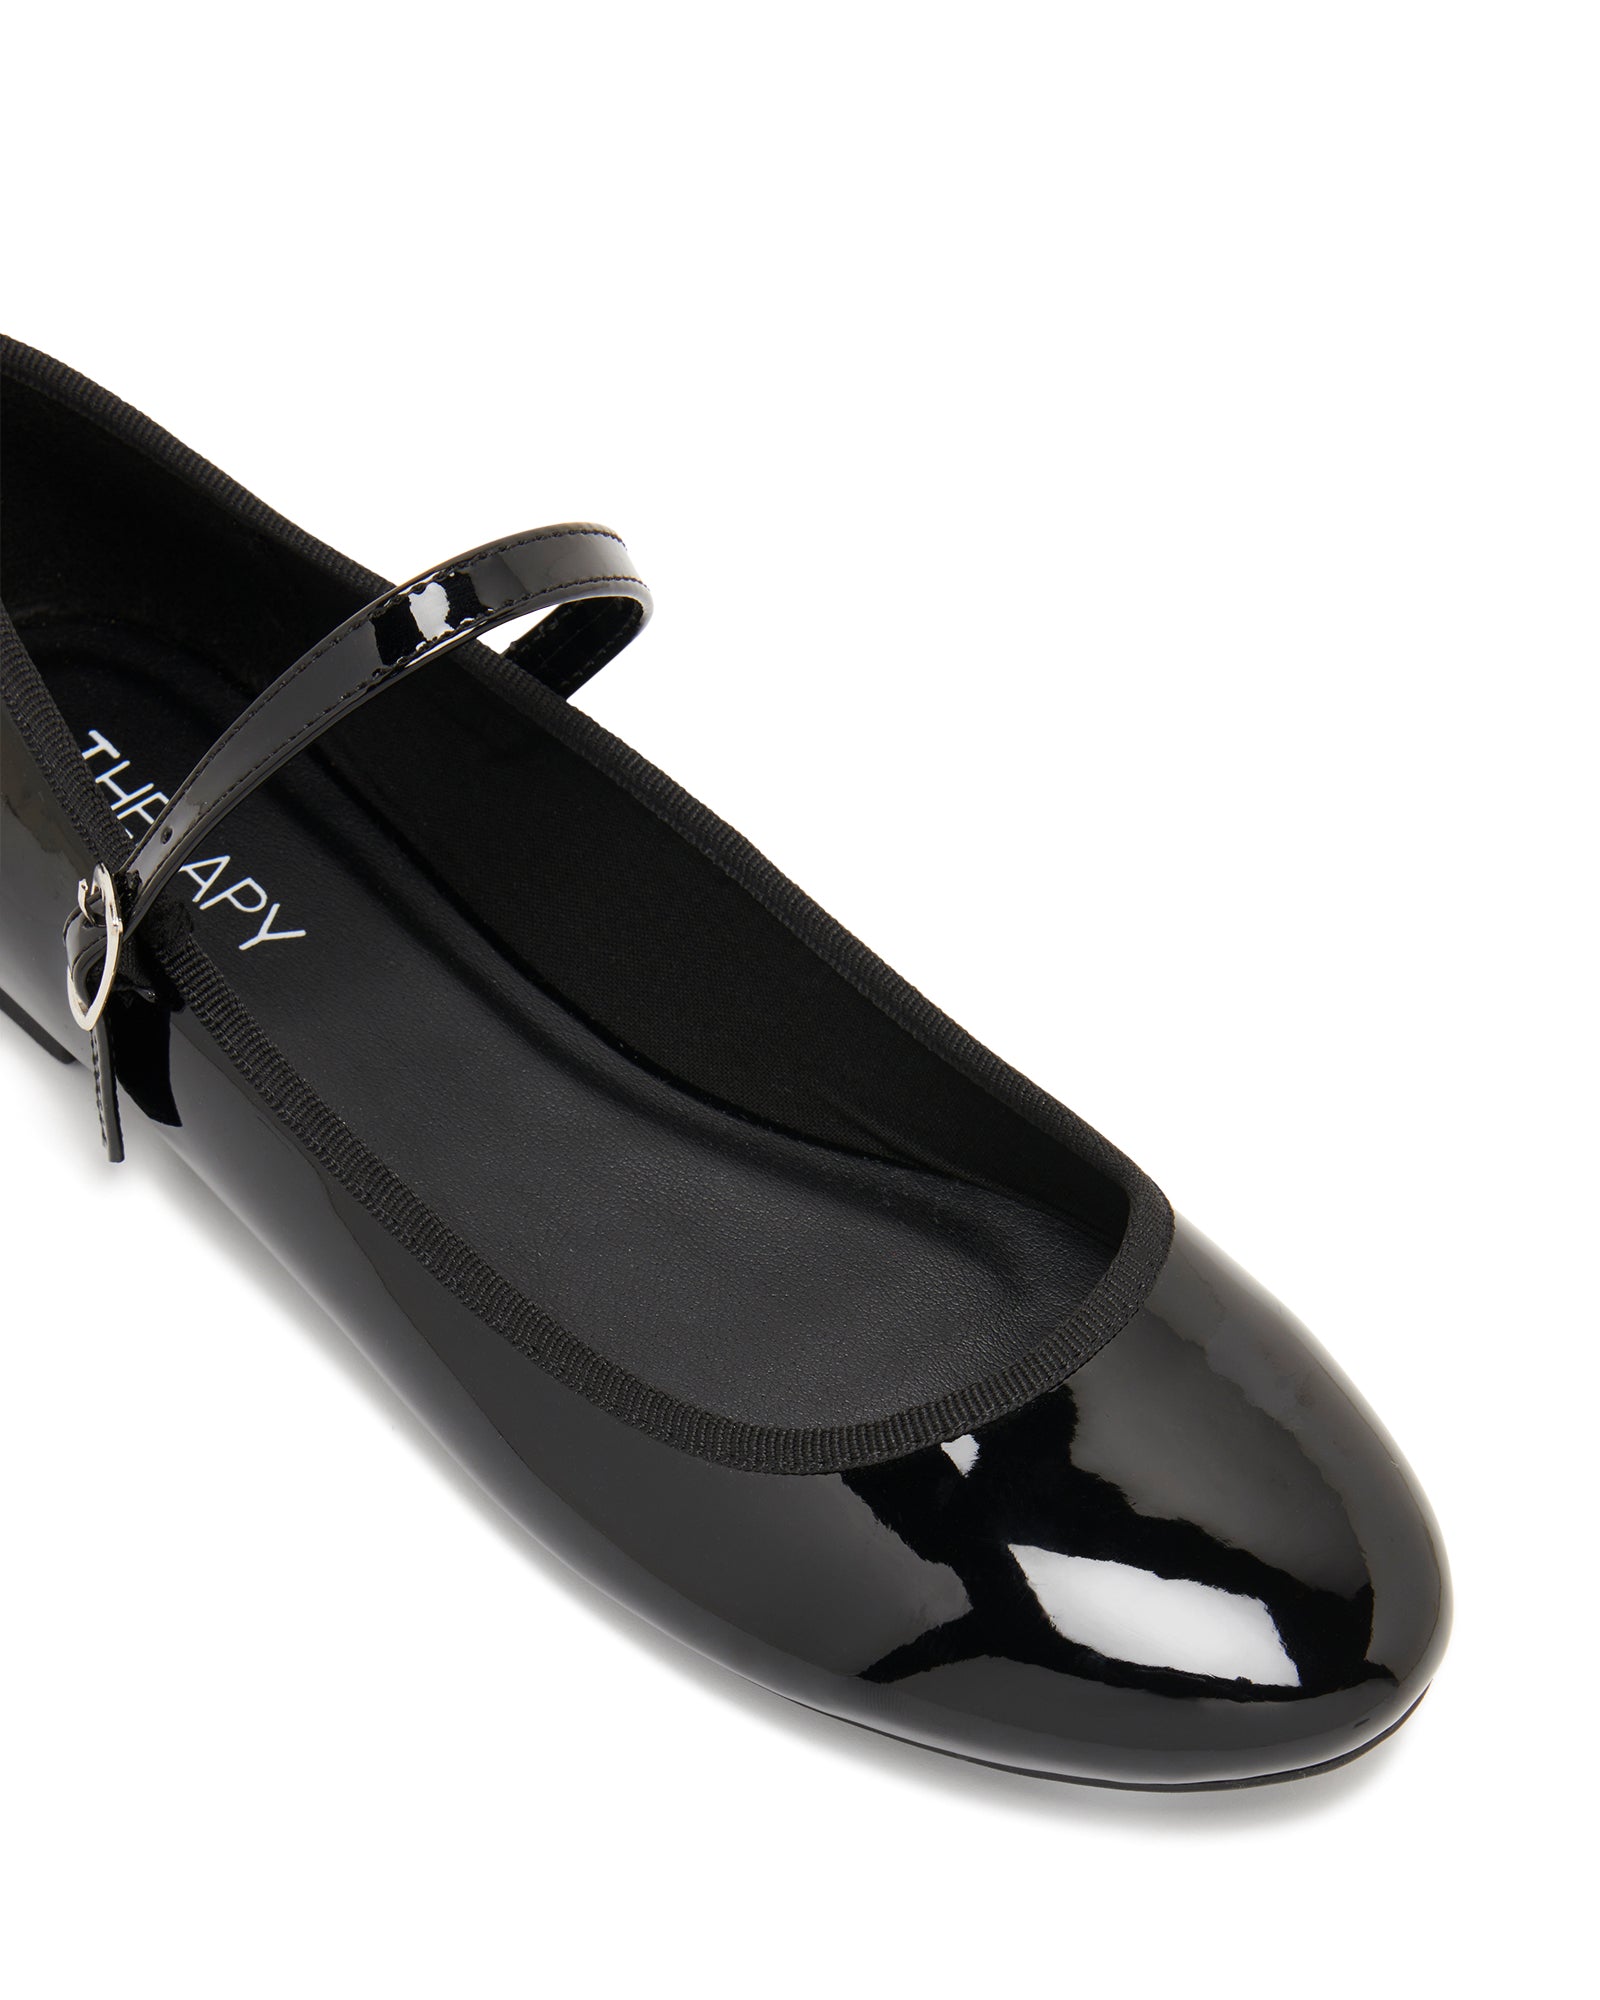 Therapy Shoes Jayne Black Patent | Women's Flats | Ballet | Mary Jane